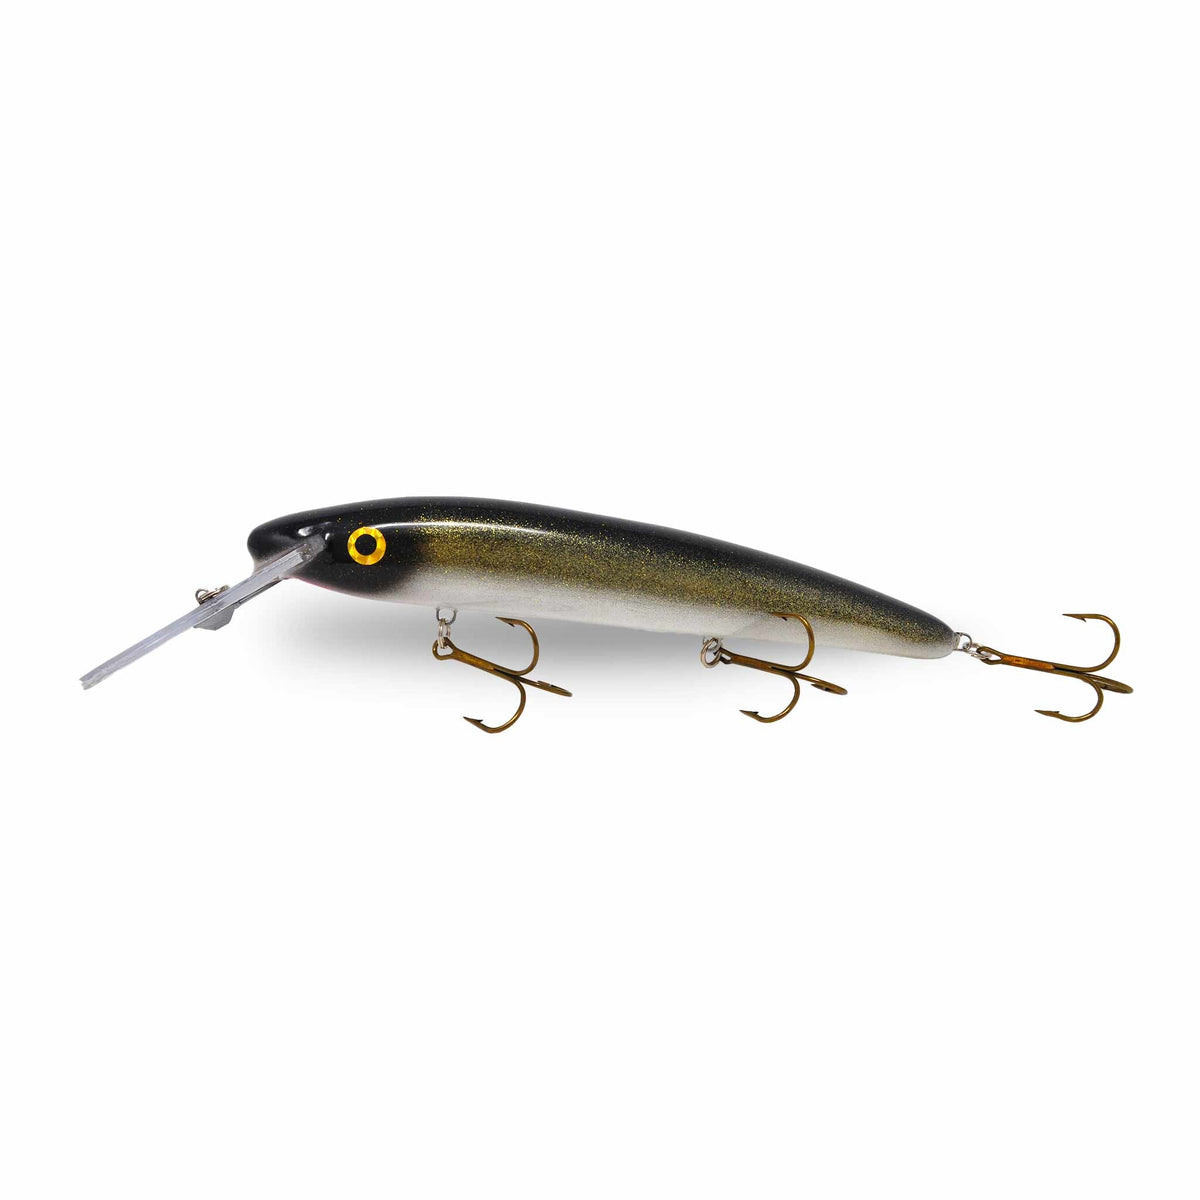 View of Crankbaits Slammer 10" Deep Minnow Crankbait Sucker available at EZOKO Pike and Musky Shop